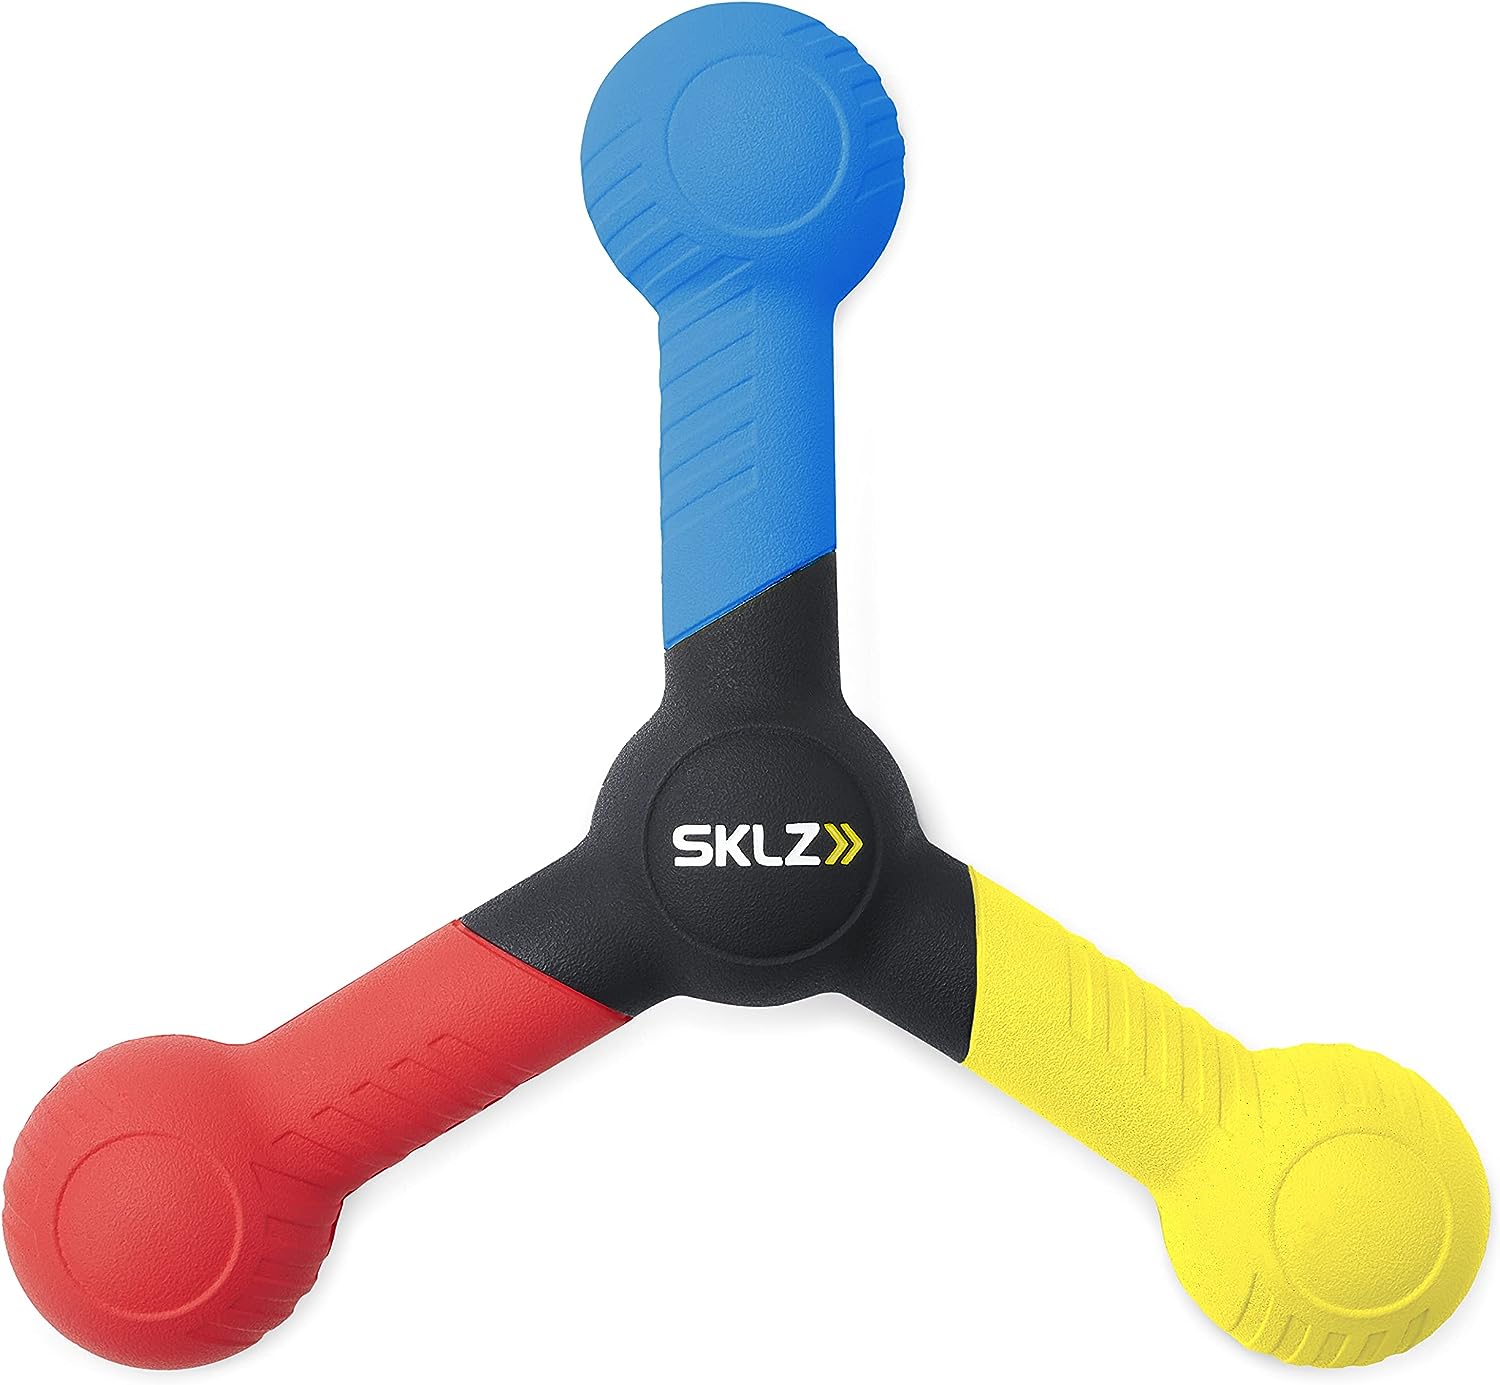 The SKLZ reactive tool has 3 colored rods in a triangular shape. They are red, blue, and yellow. You can throw this in the air and call out a color so the player has to catch that exact color. It works on hand-eye coordination.